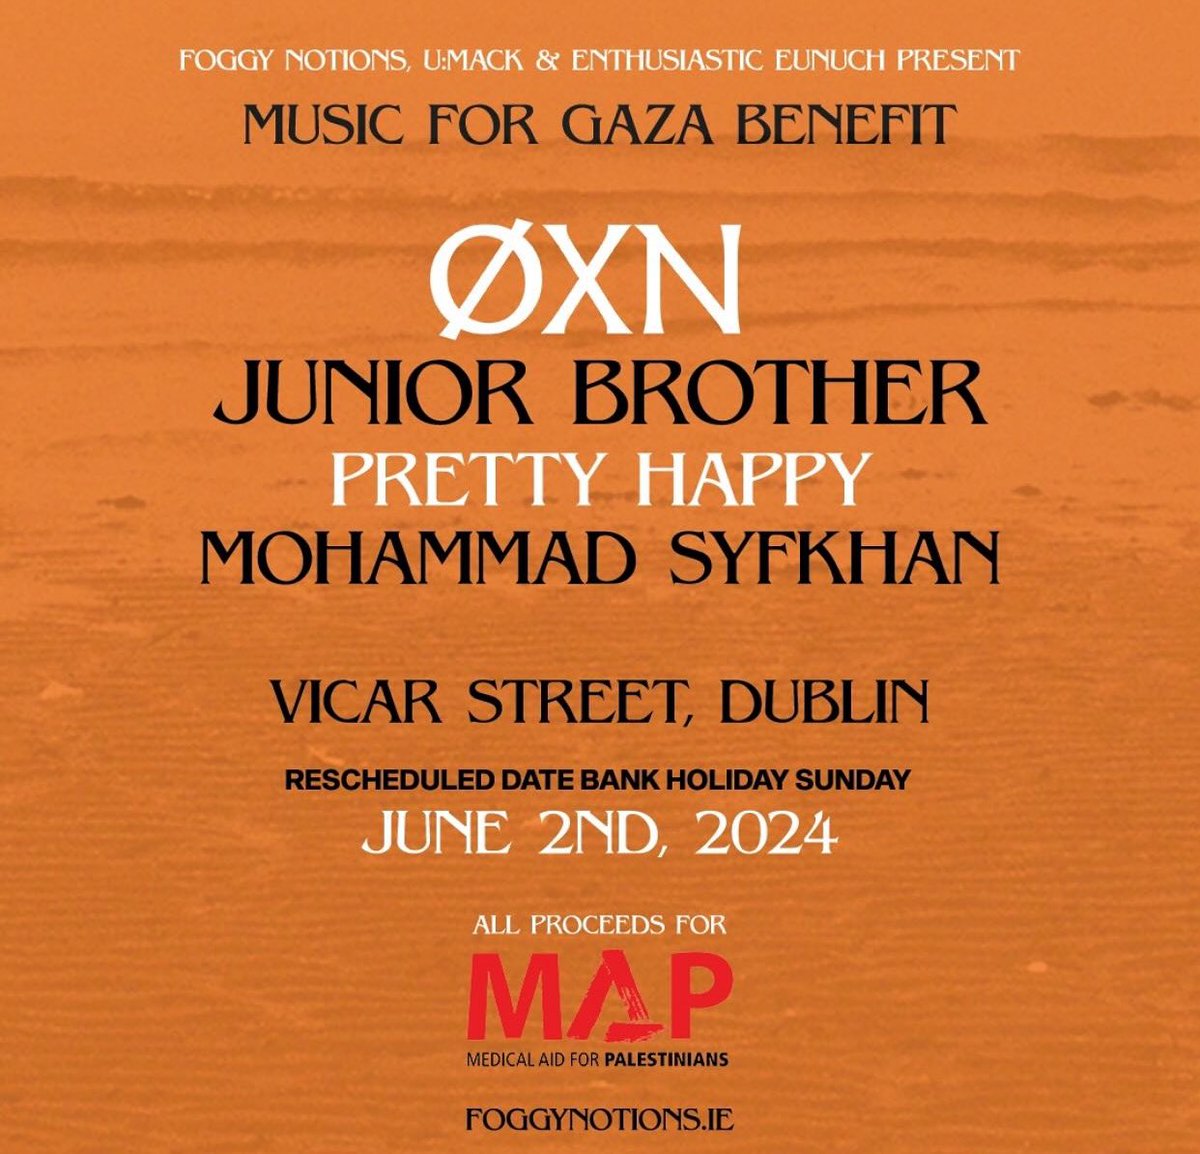 Gig for Gaza at Vicar St taking place June bank holiday weekend. All profits going to MAP. This will be one of our last shows. Delighted to be sharing the stage with @JuniorBrotherIE Mohammad Syfkhan and @prettyhappyband for such an important cause. 🇵🇸💚 ticketmaster.ie/gig-for-gaza-x…